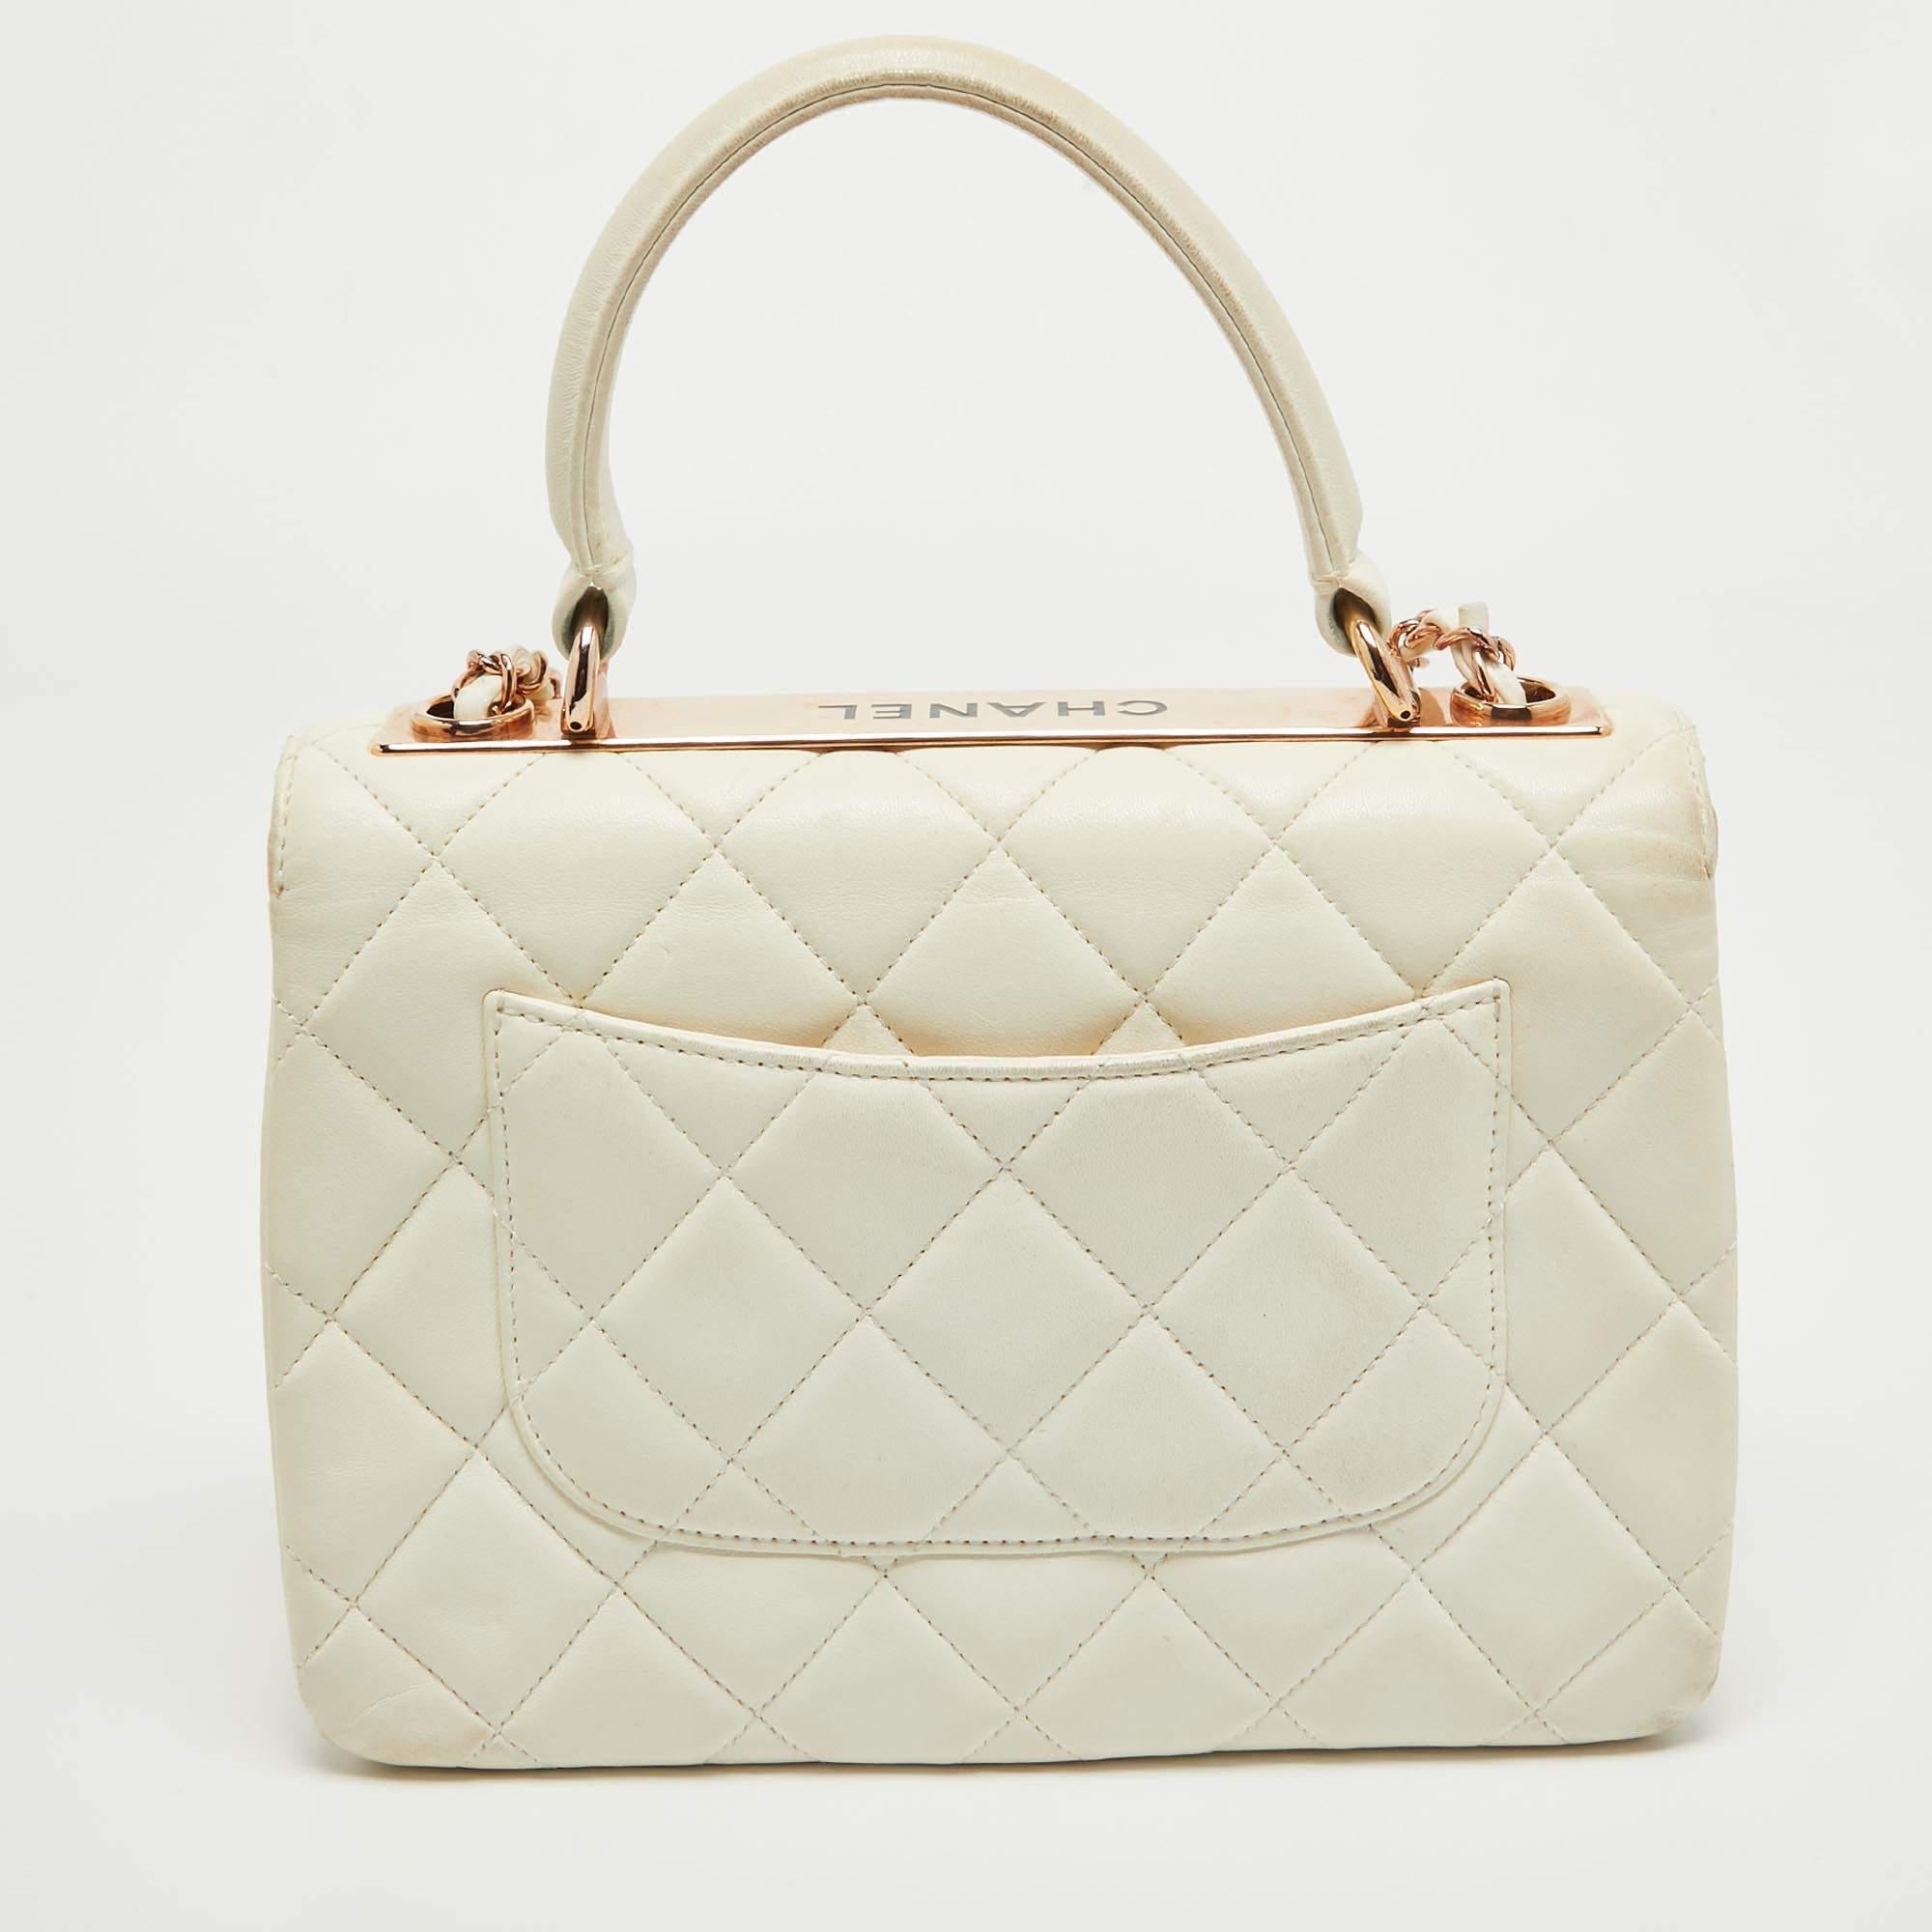  Chanel Off White Quilted Leather Small Trendy CC Flap Bag For Sale 16